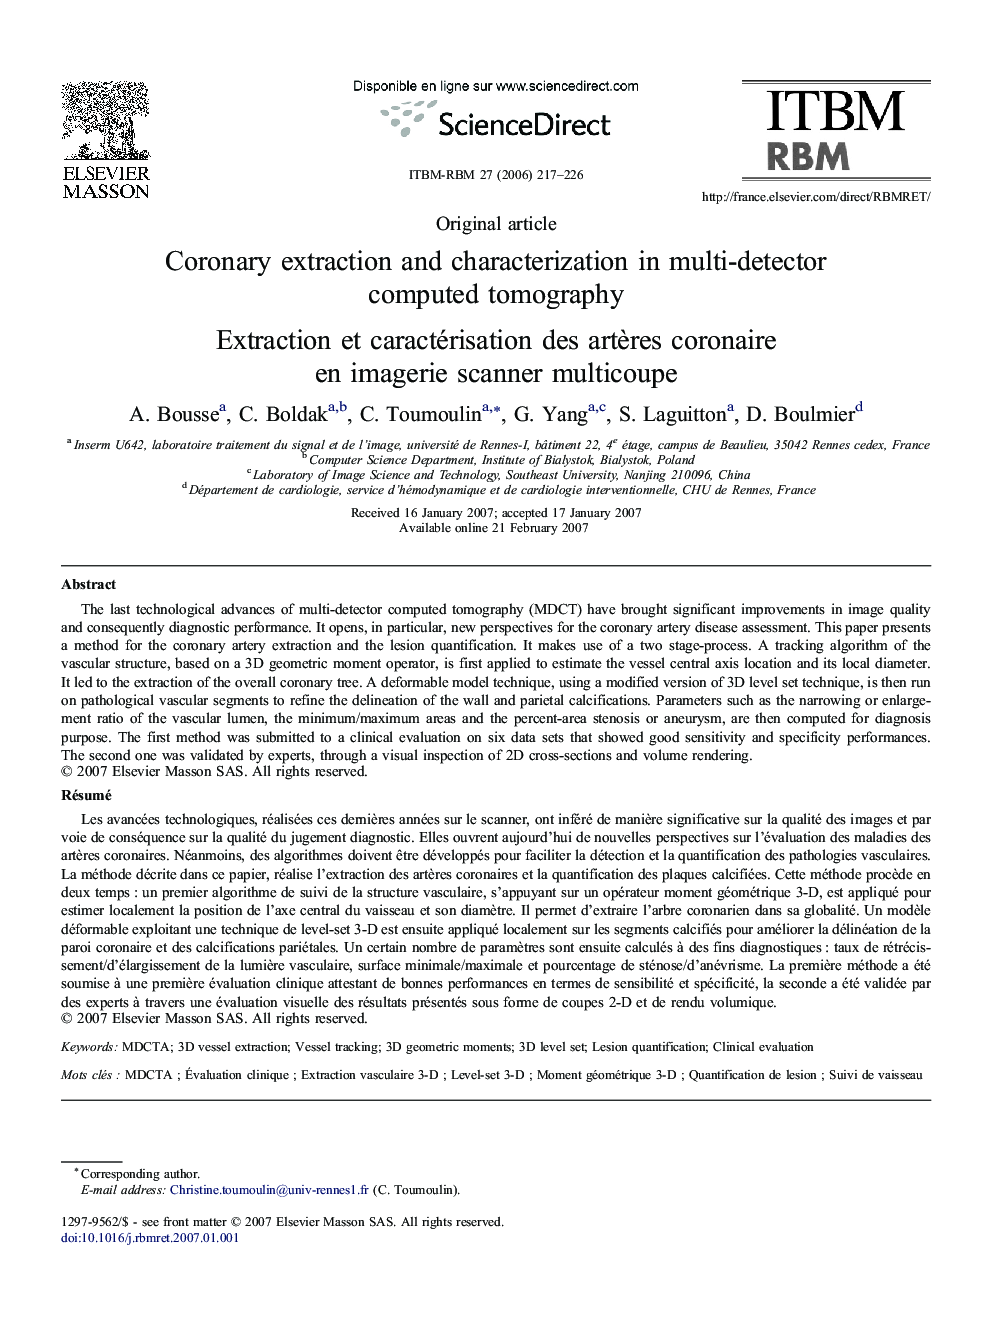 Coronary extraction and characterization in multi-detector computed tomography